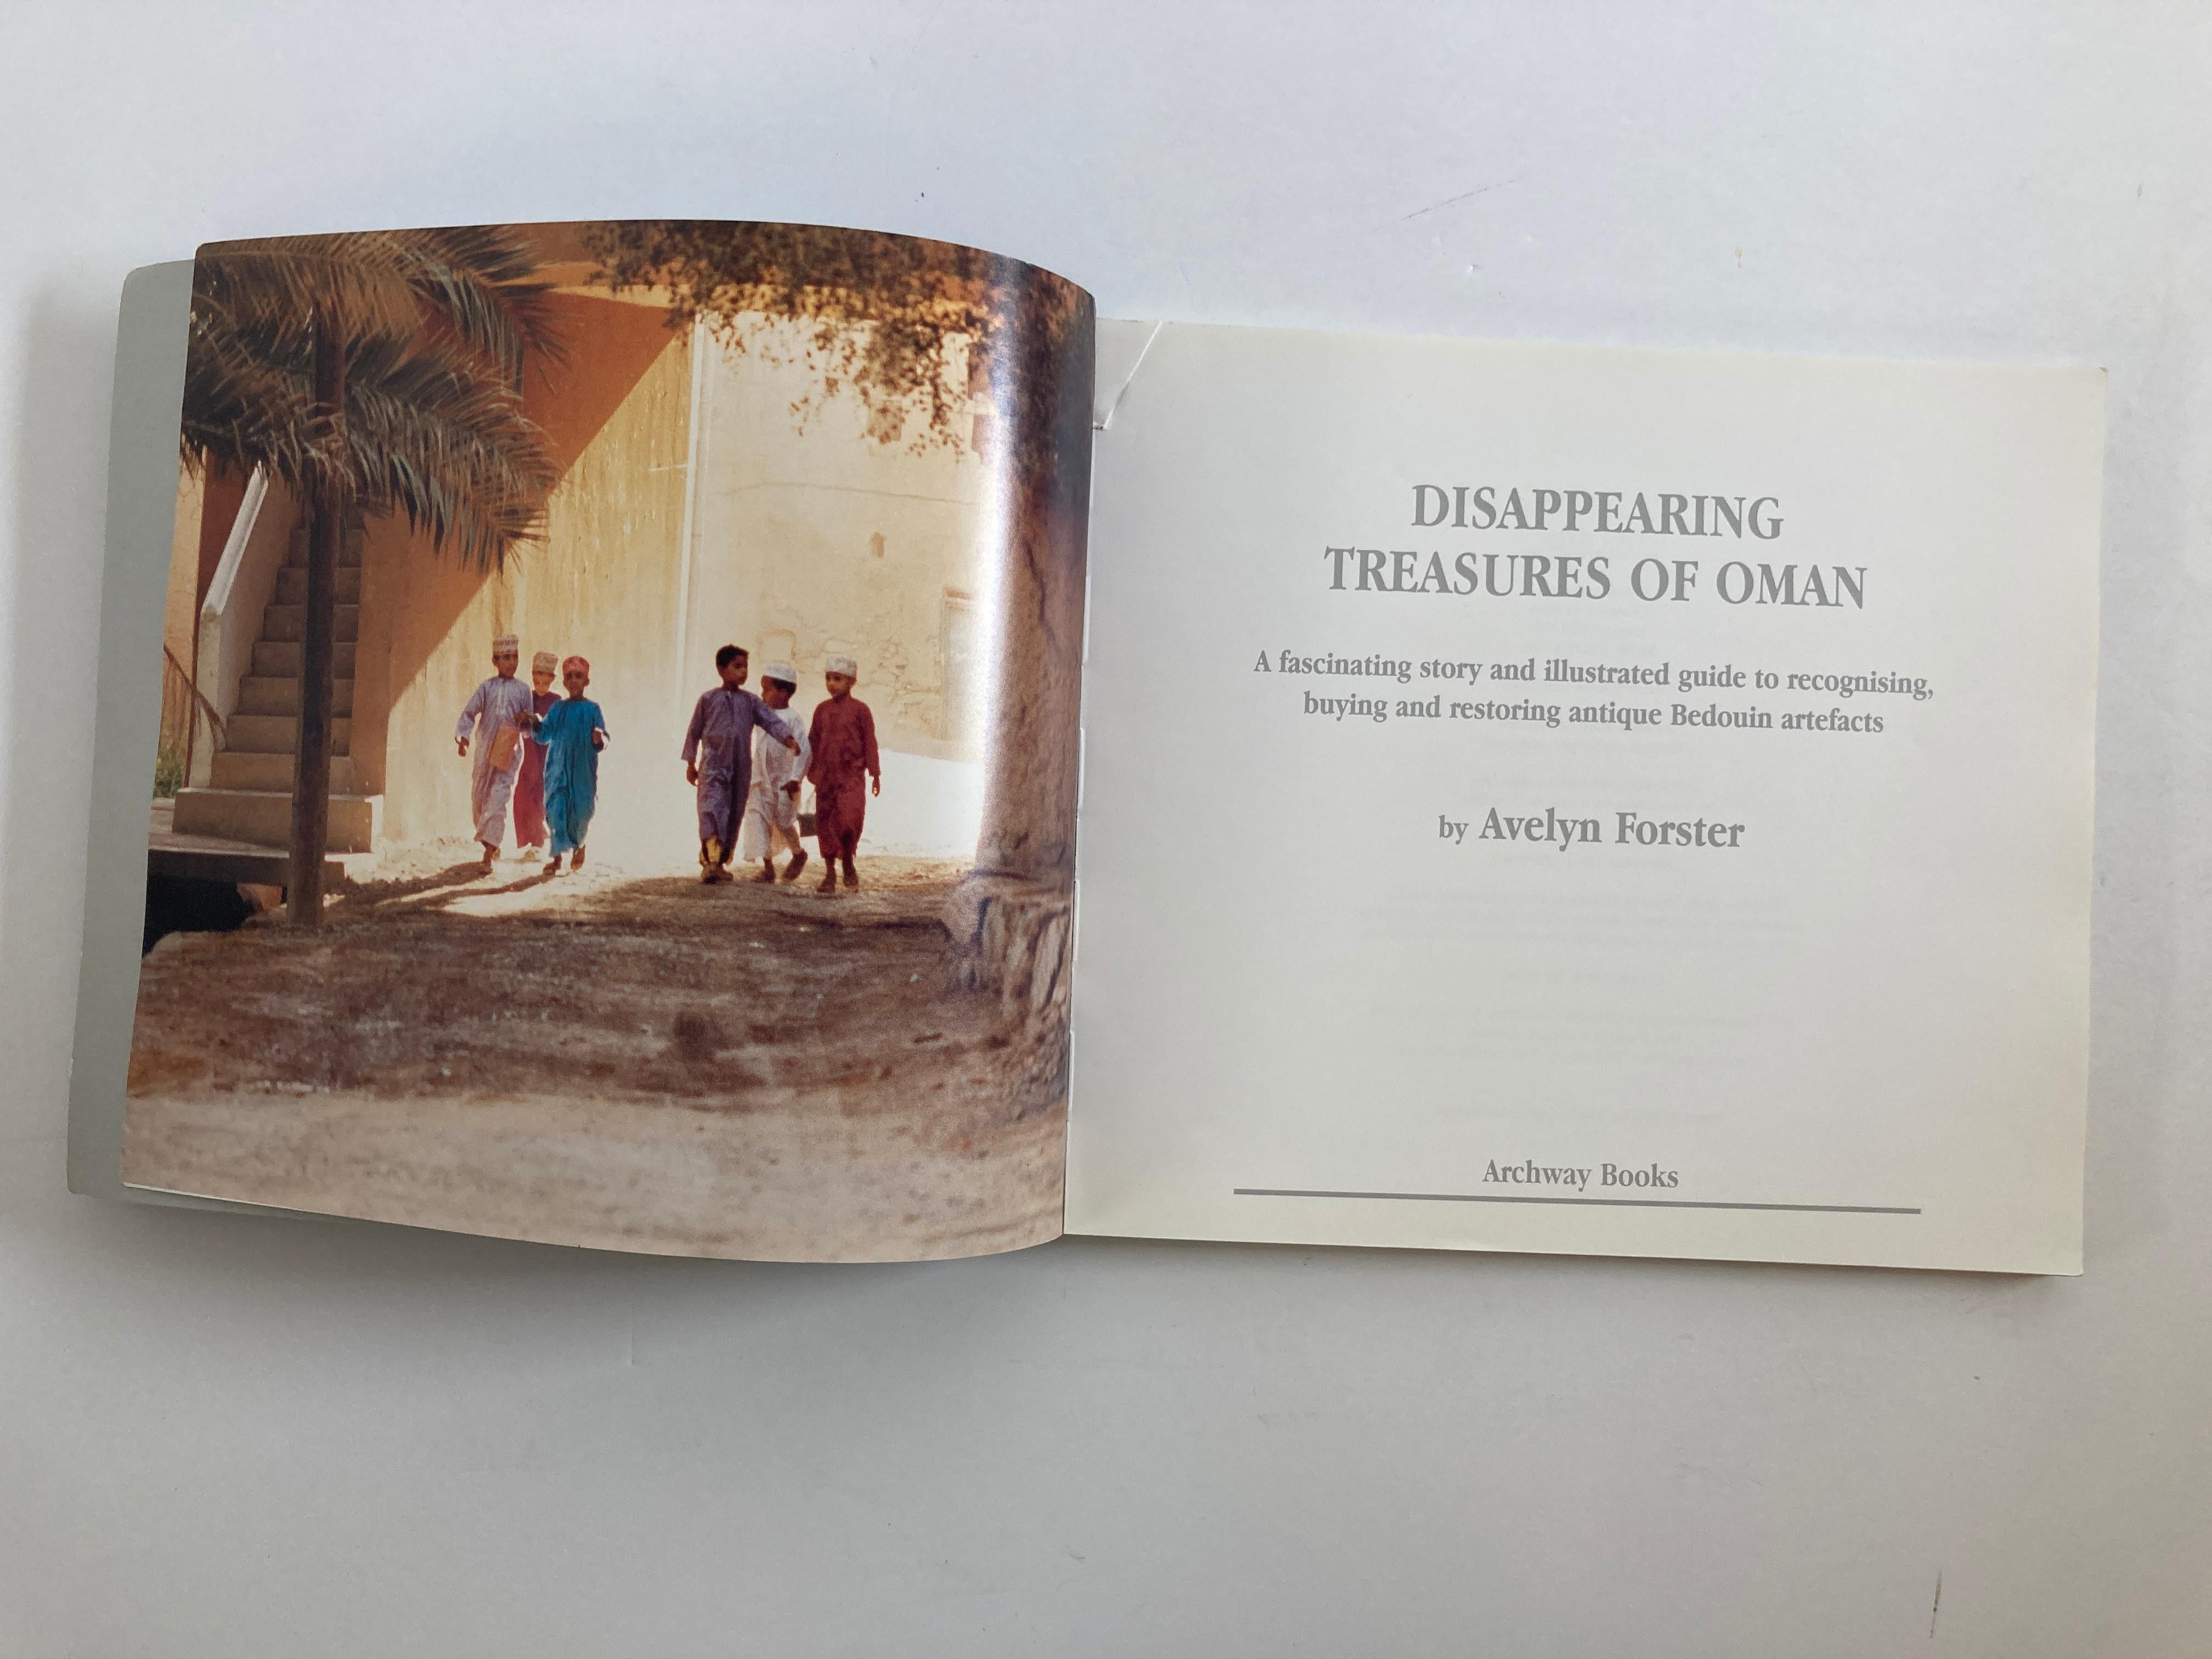 Disappearing Treasures of Oman, Buch von Avelyn Forster im Zustand „Gut“ im Angebot in North Hollywood, CA